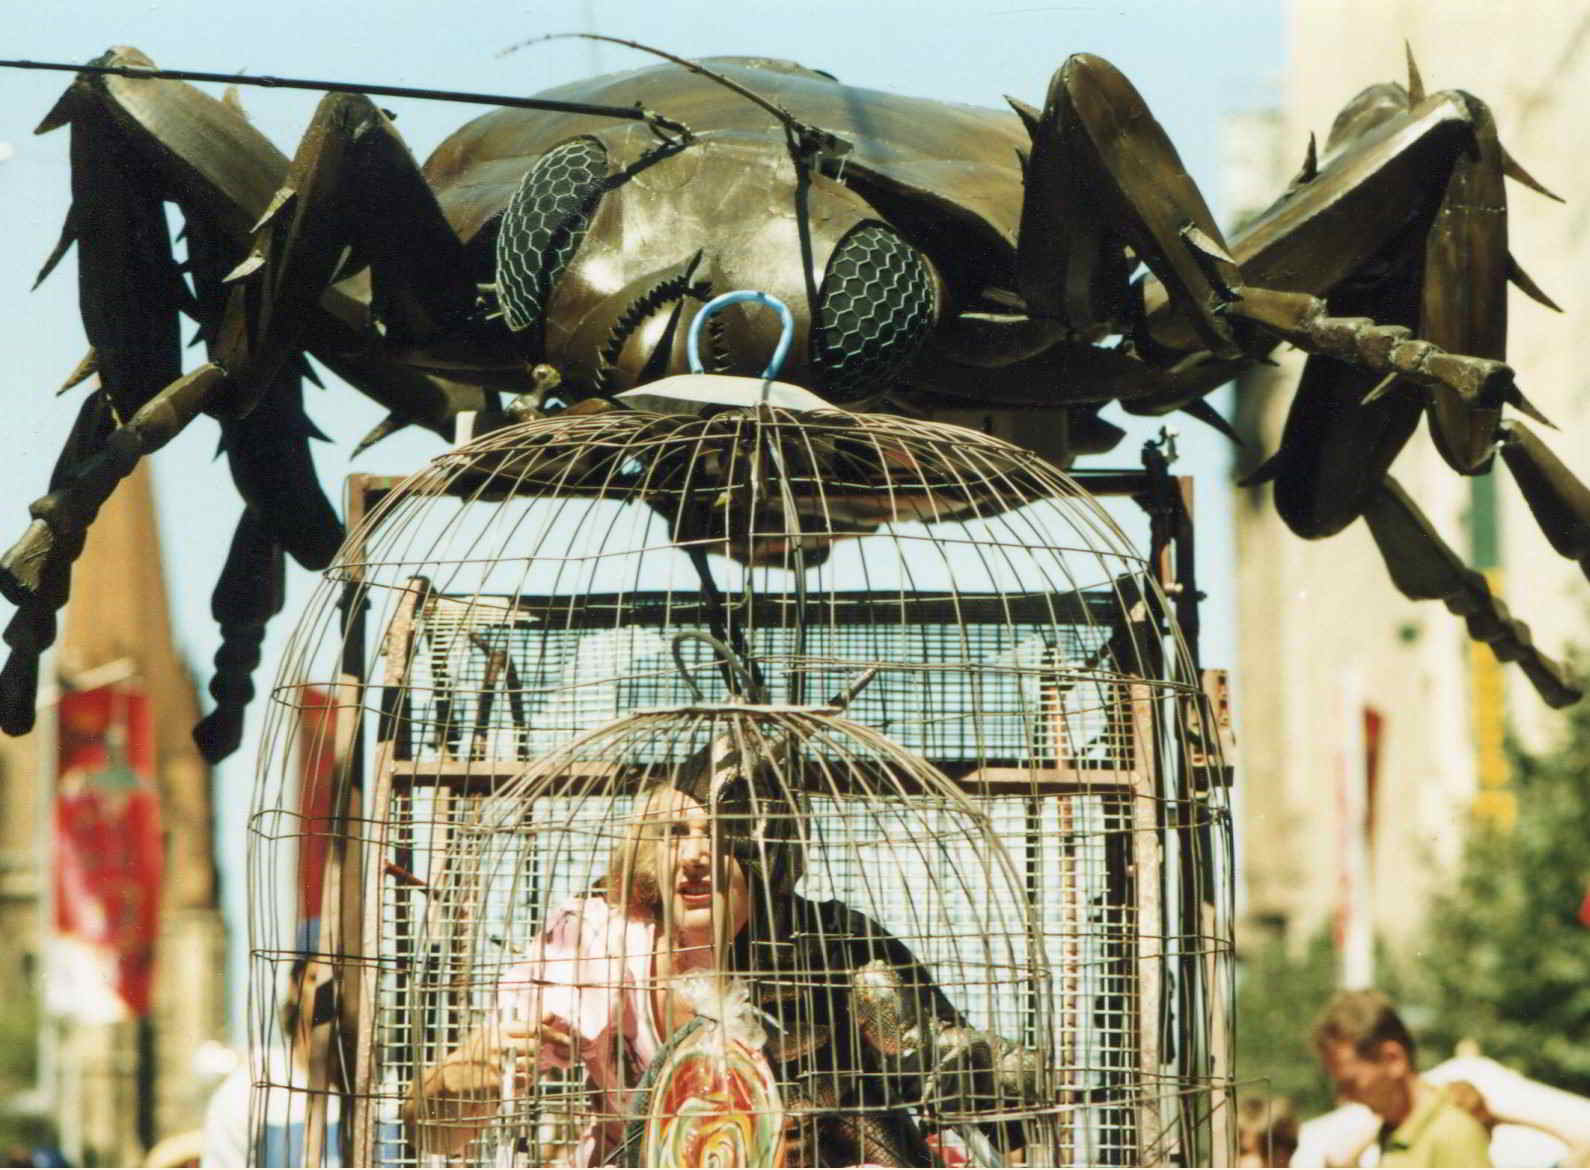 Road Roach parade image large cockroach head on top of cage with woman inside